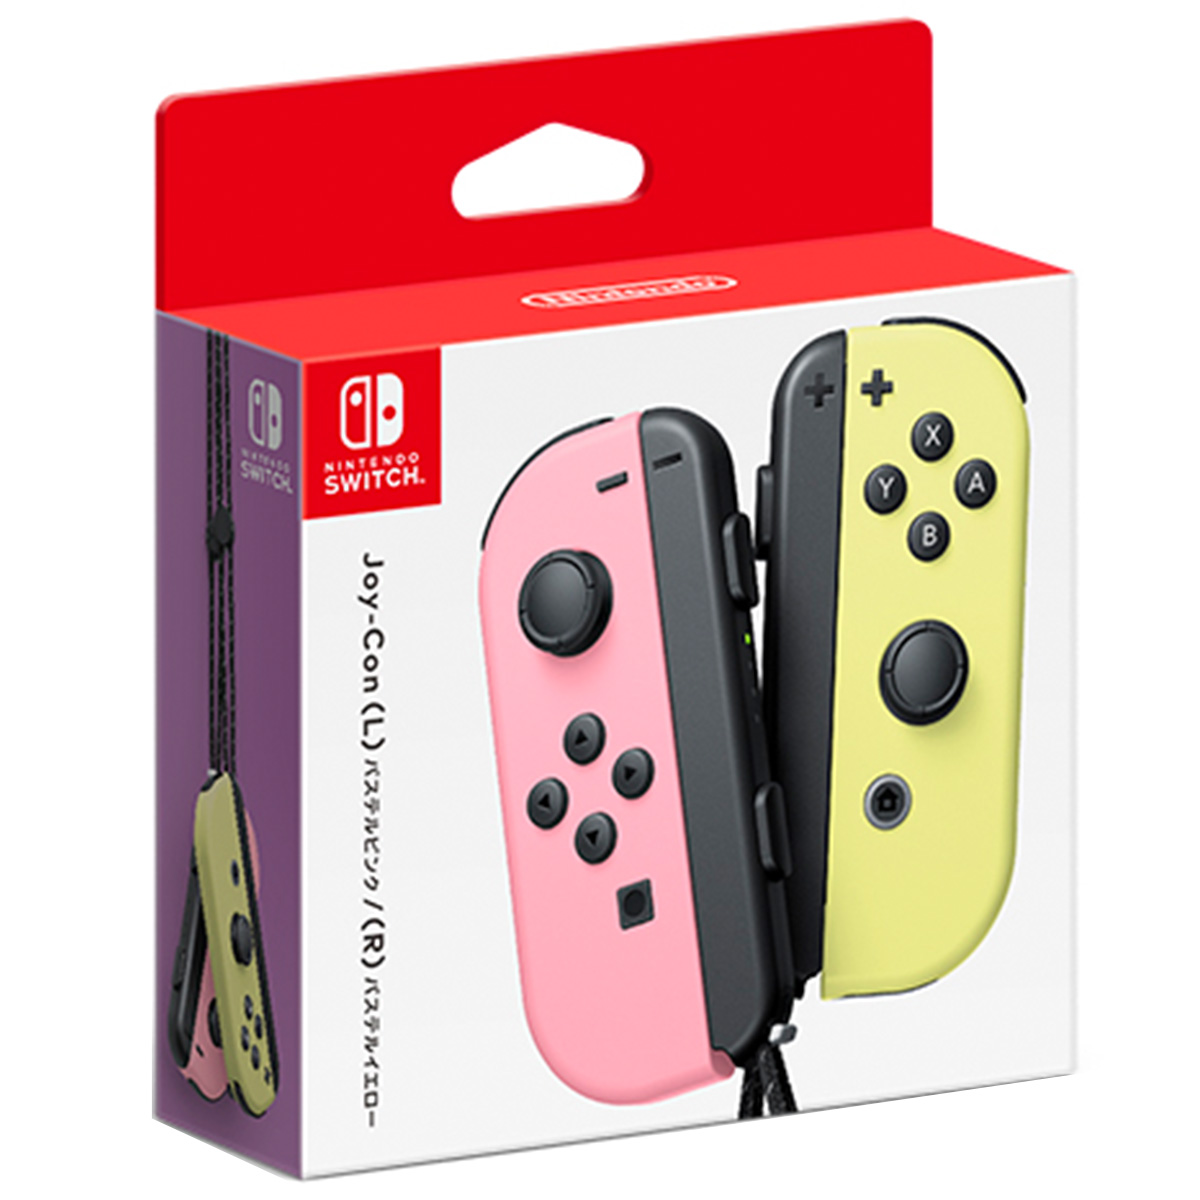 ［Switch］Joy-Con スイッチ ジョイコン パステルピンク(L)/パステルイエロー(R) 　HAC-A-JAVAF